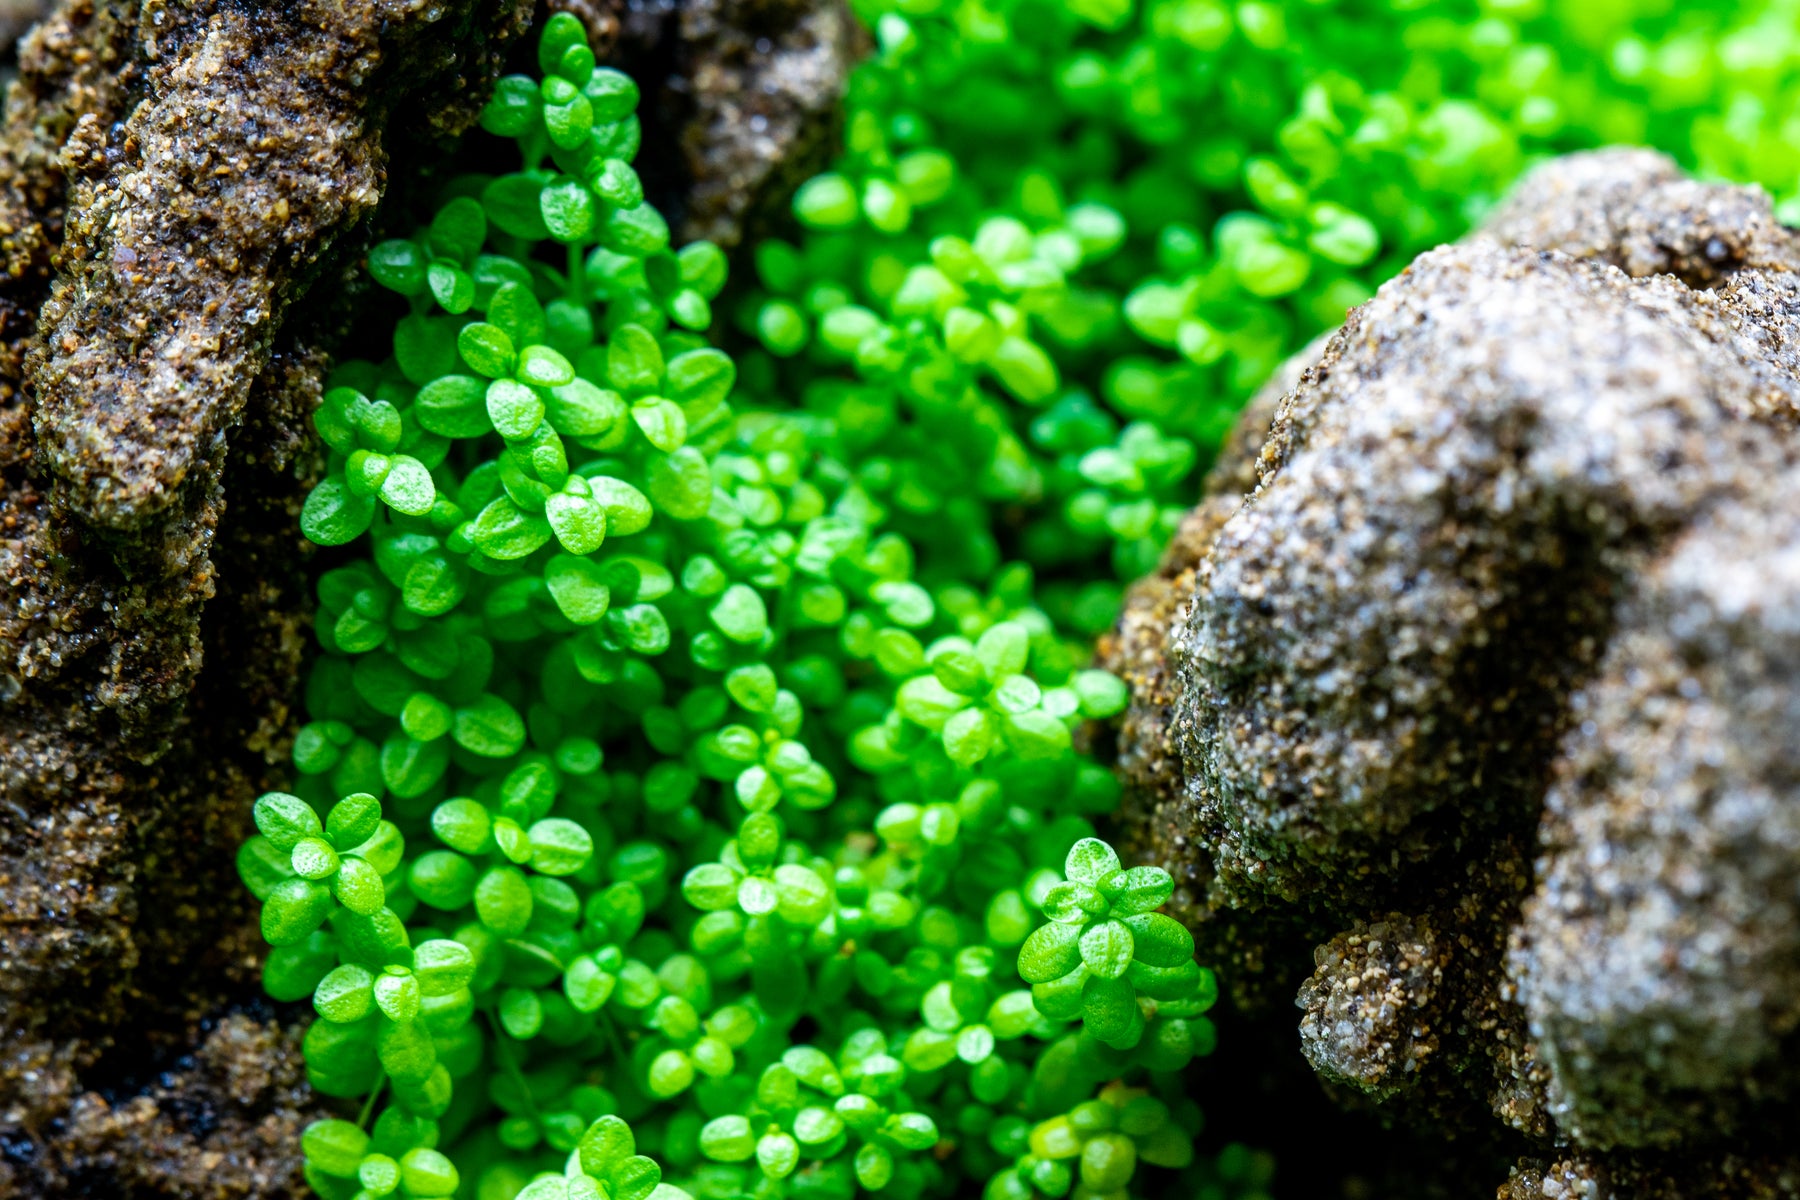 How To Grow Carpeting Plants in Any Type of Aquarium